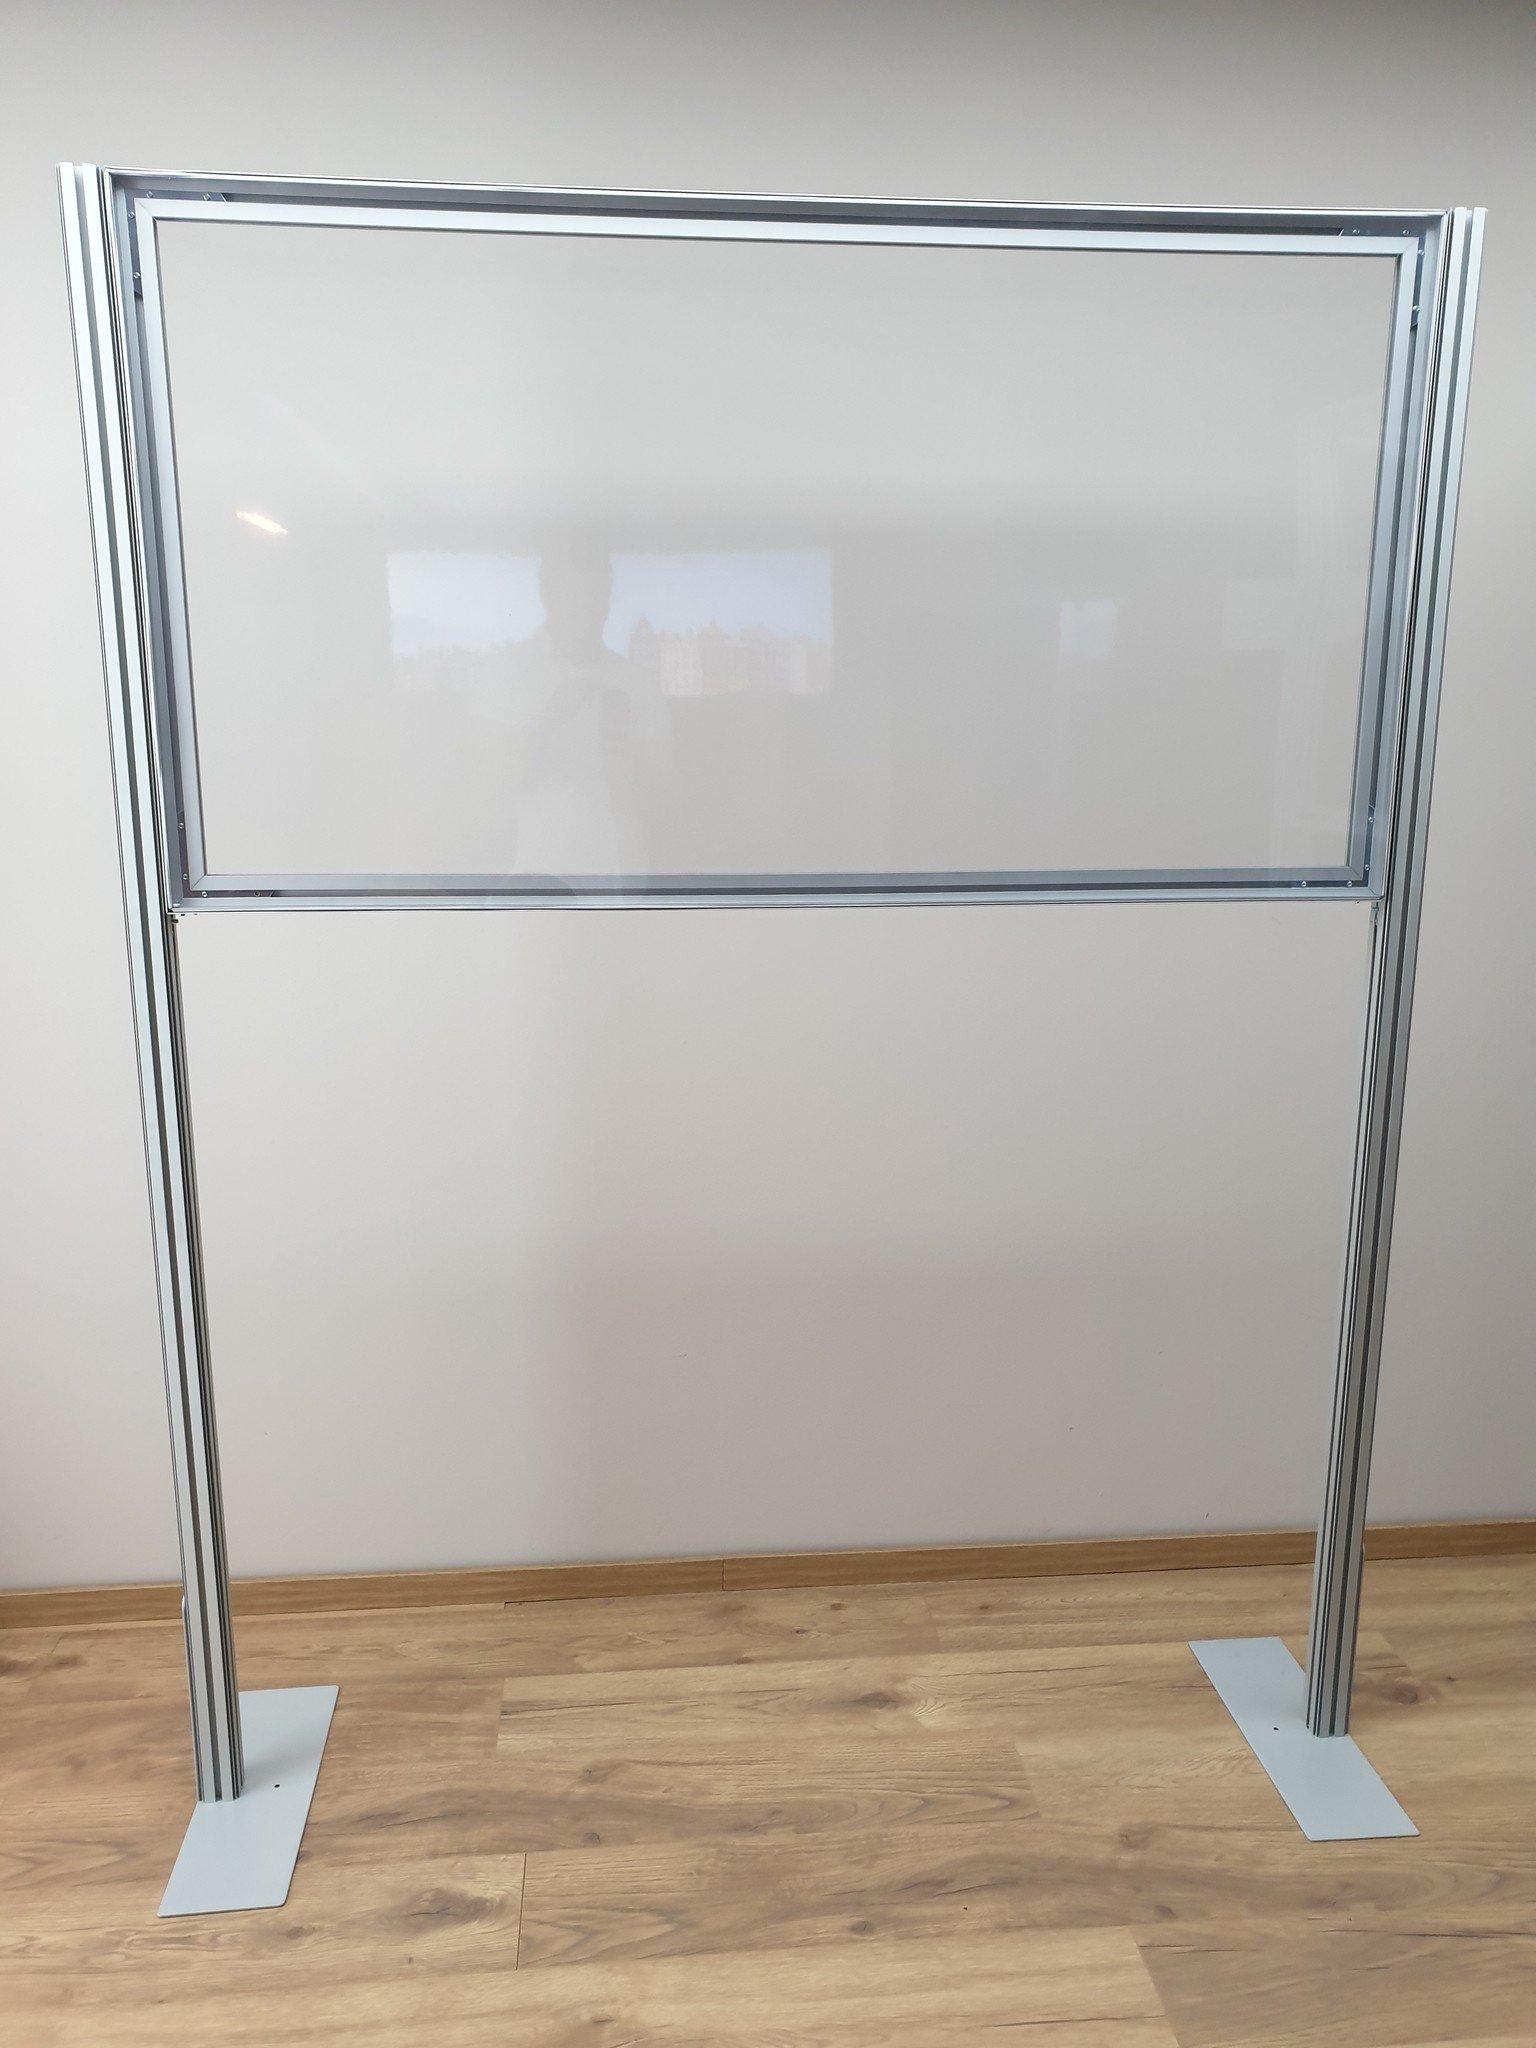 2d Counter Modell transparentes Tuch